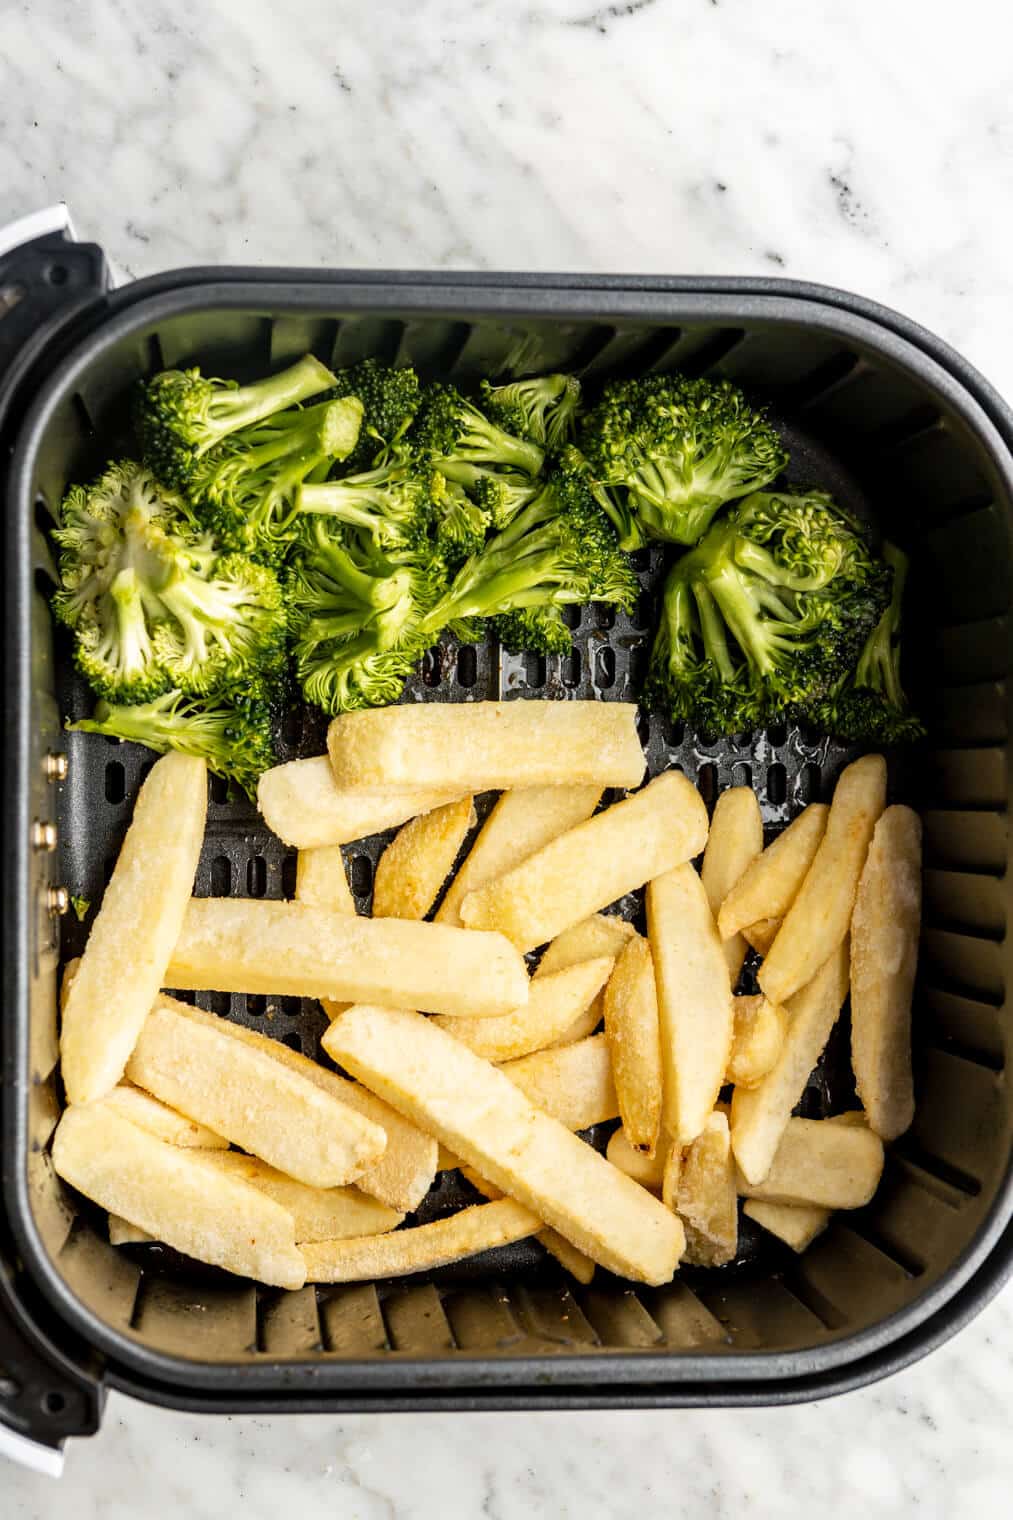 Broccoli and French fries in the air fryer basket.